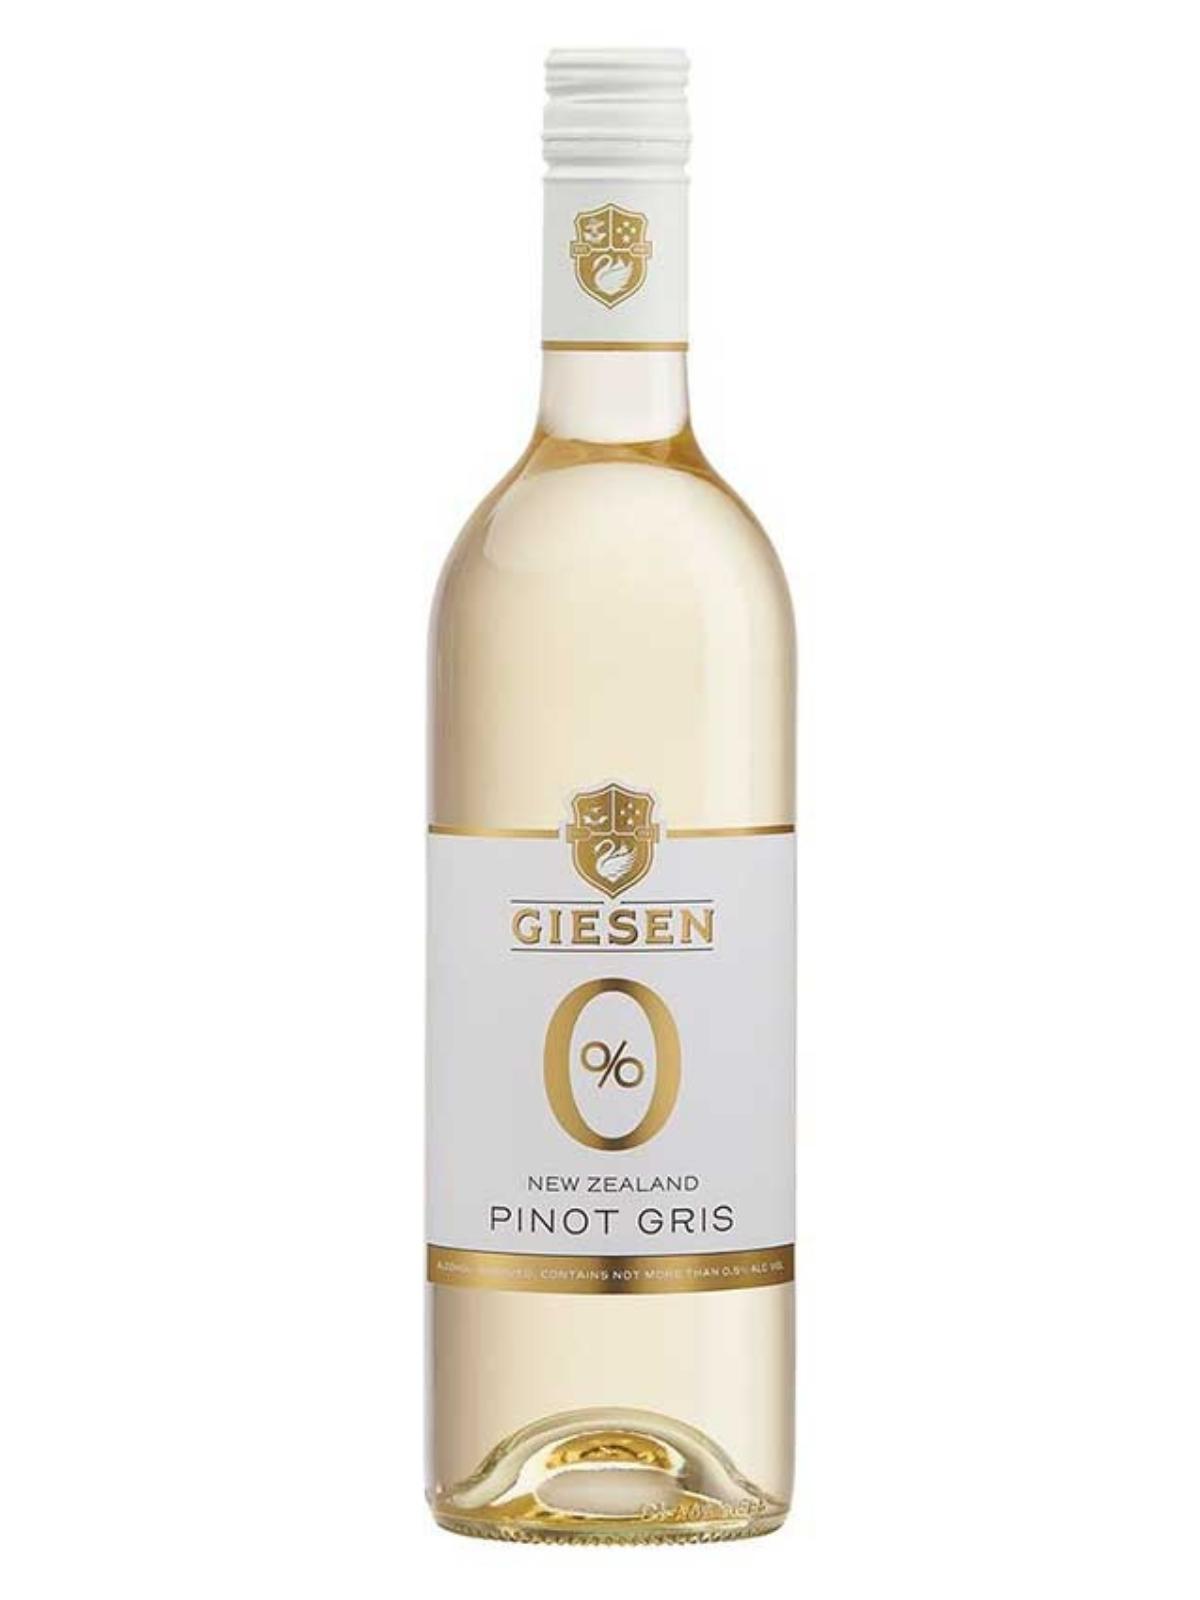 bottle of Giesen non-alcoholic Pinot Gris with a white label and gold wording on the label.